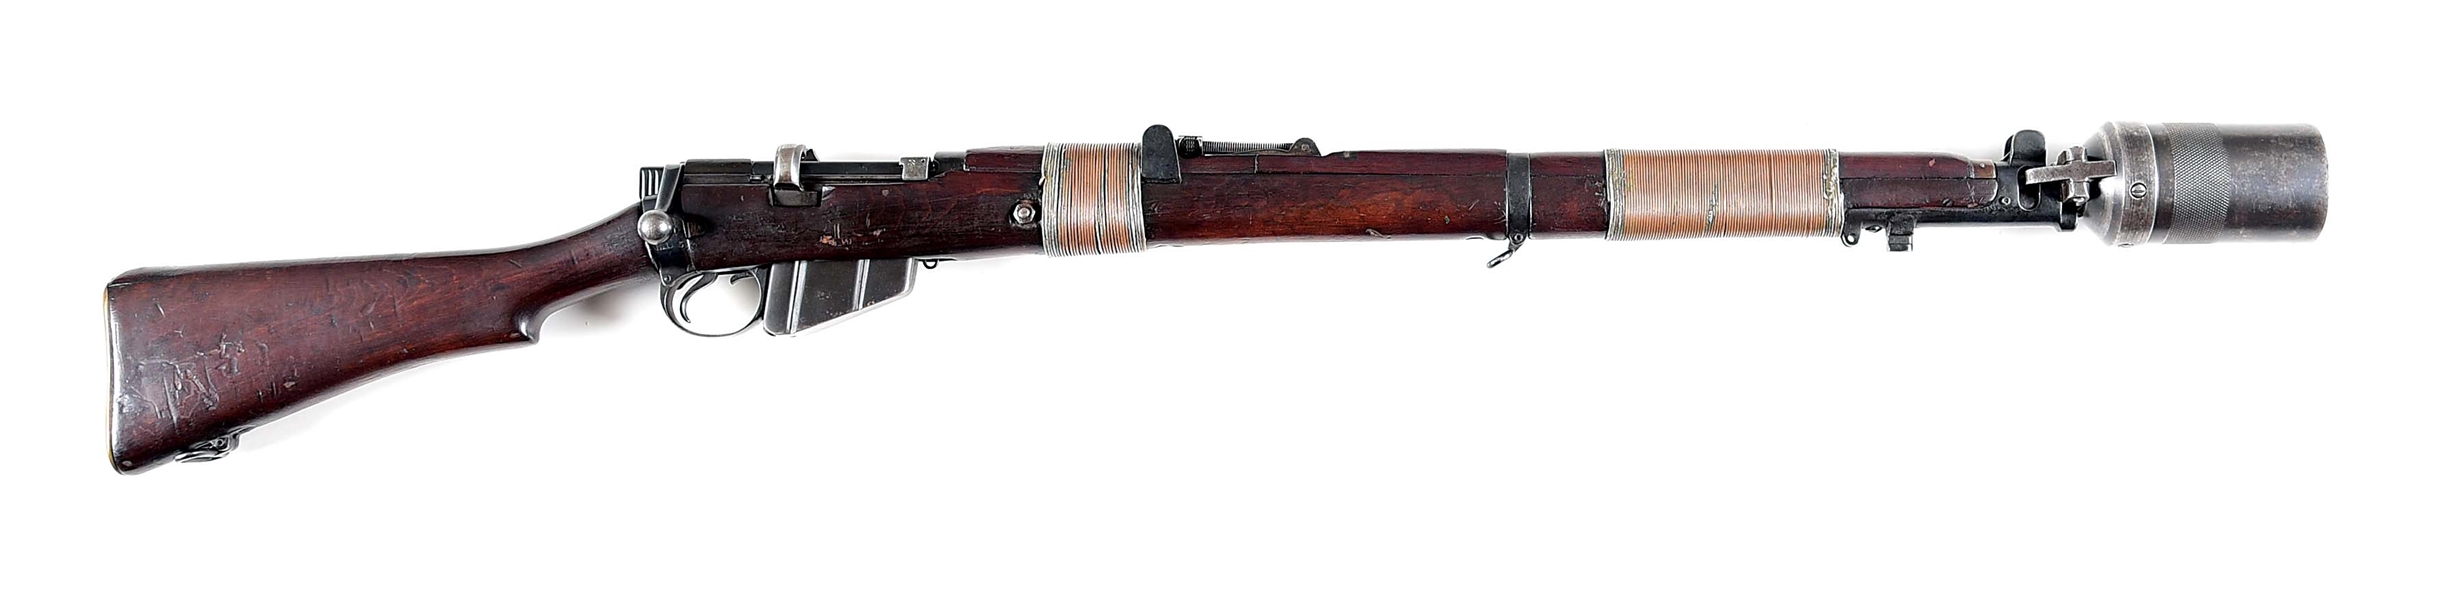 (C) INDIAN ISHAPORE ENFIELD NO. 1 MK III  BOLT ACTION RIFLE WITH GRENADE LAUNCHER ATTACHMENT.